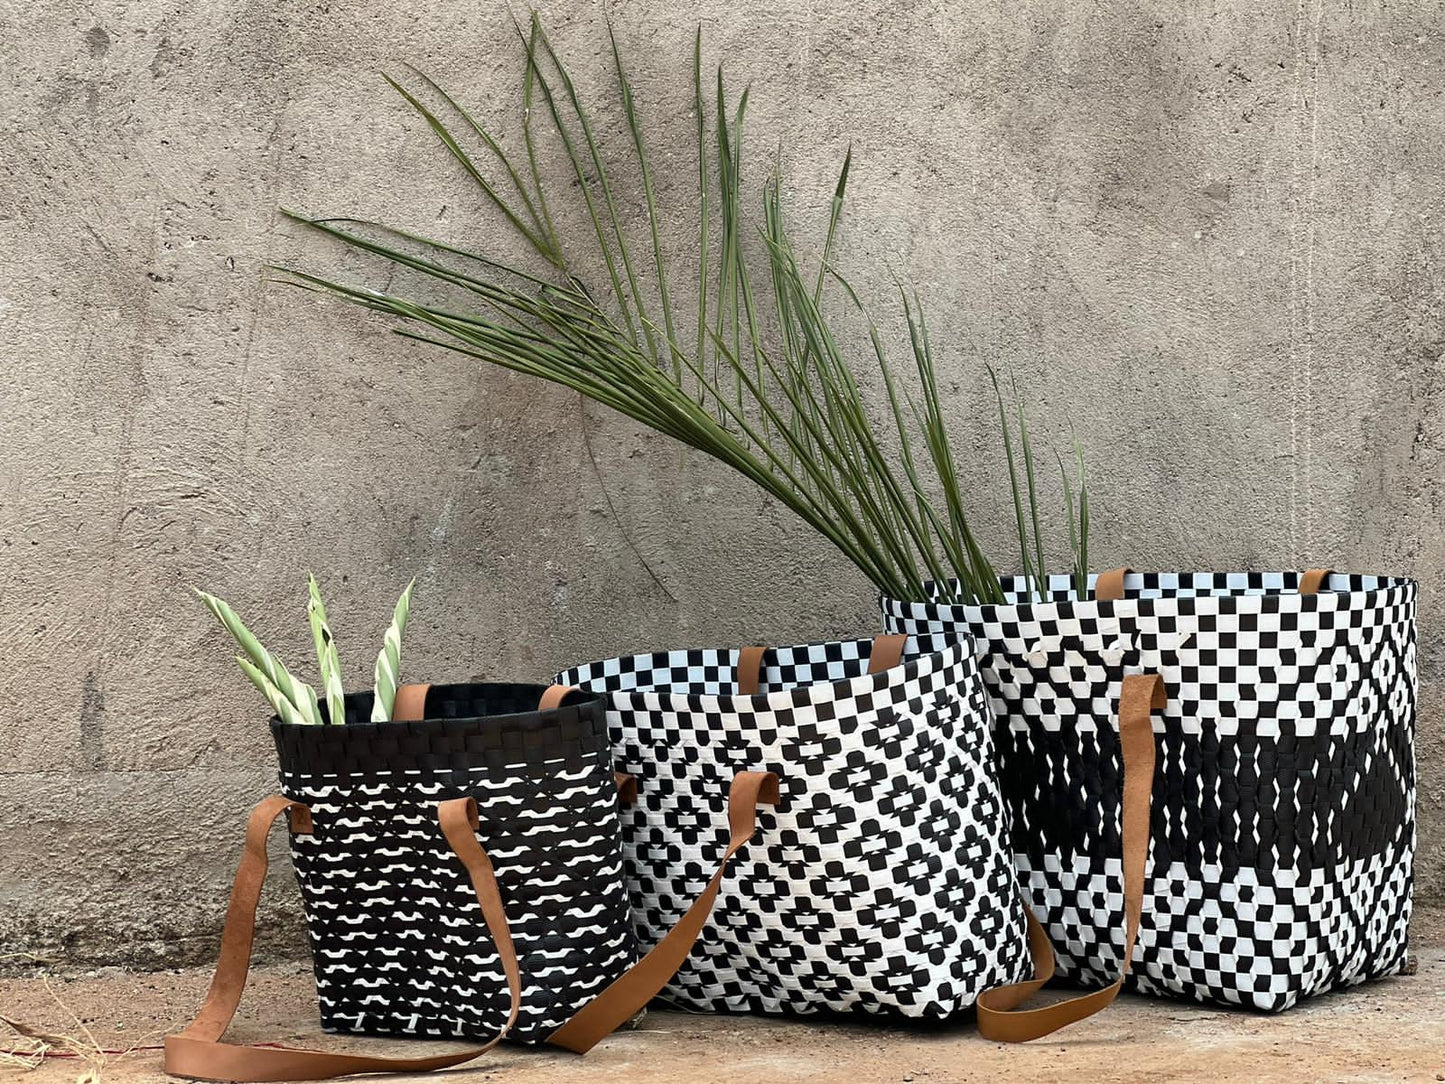 Sanyu Rising - unique handmade basket with leather handles (black/white)